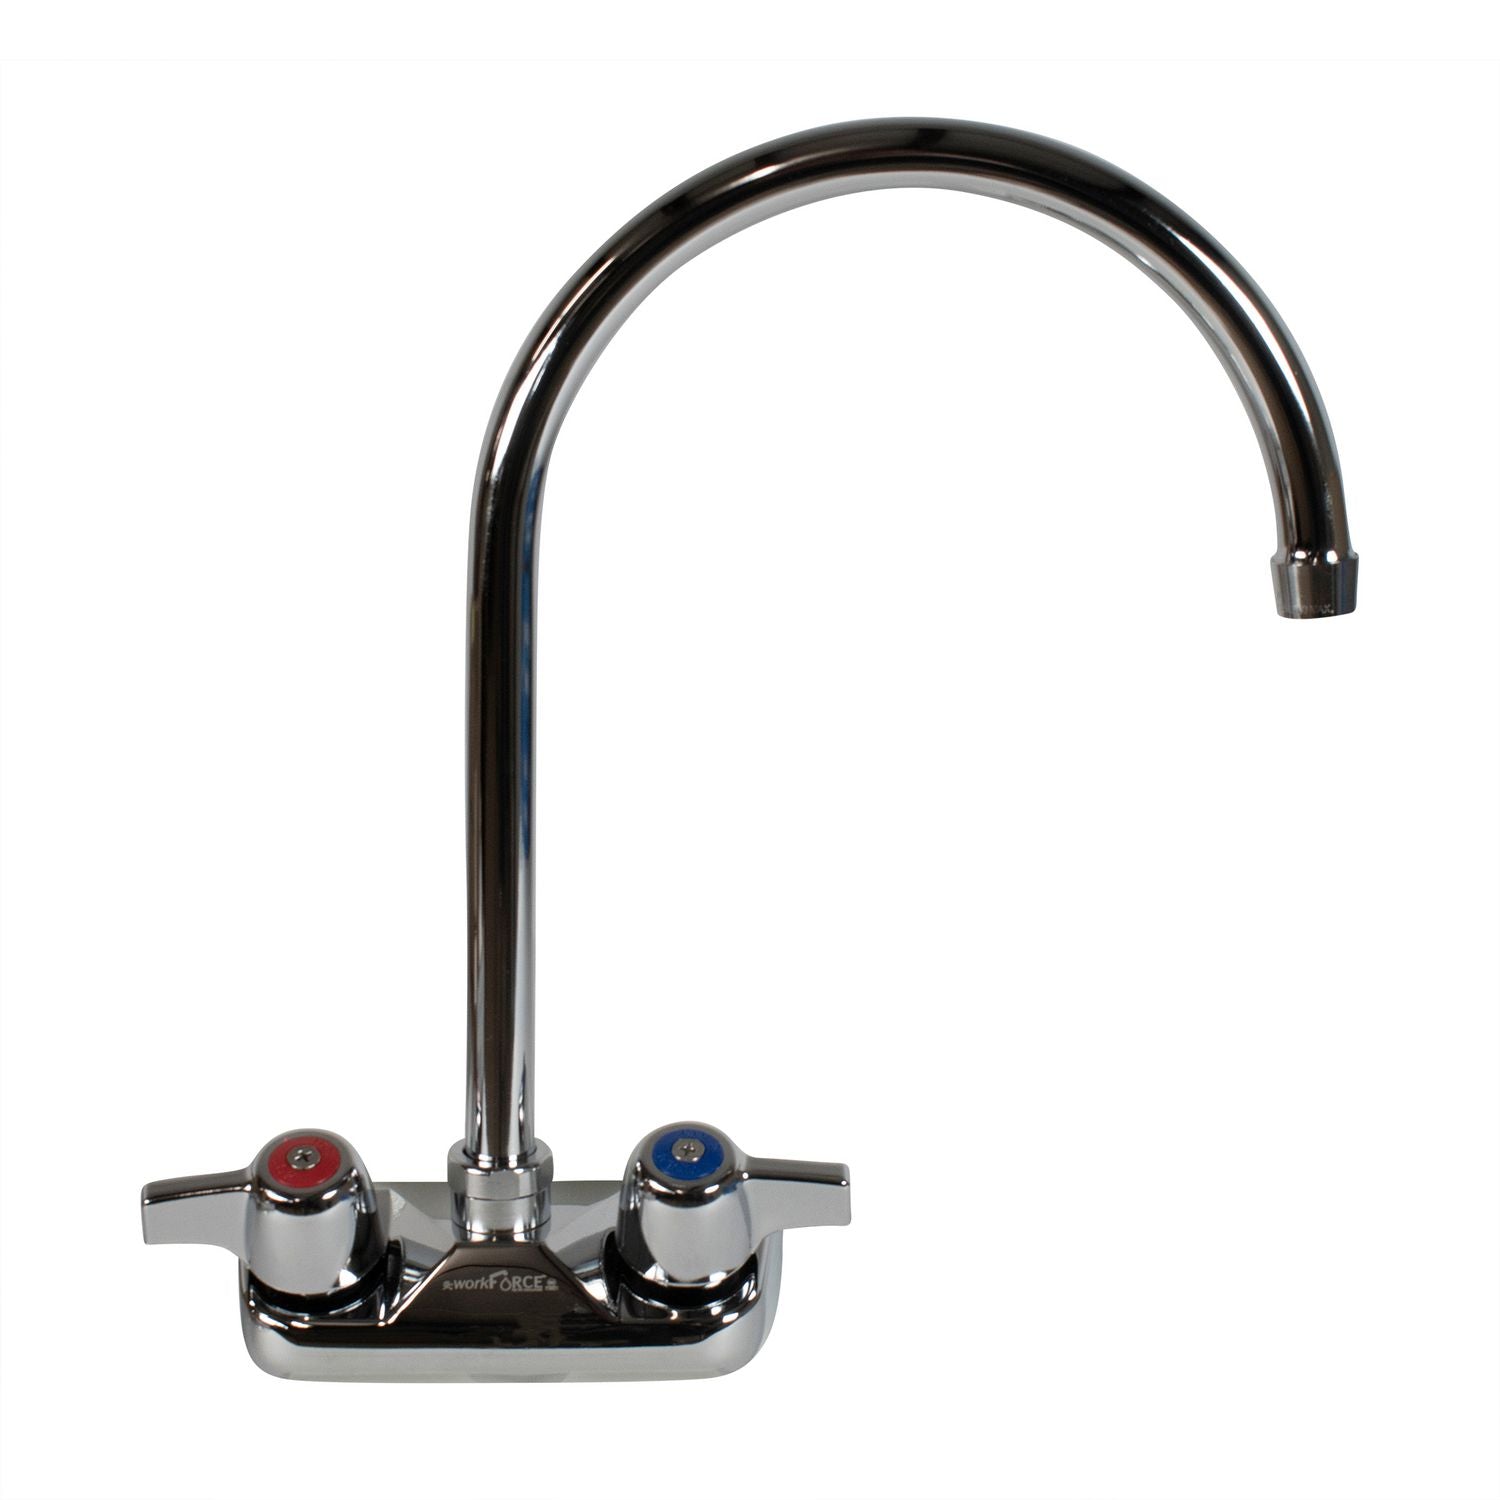 workforce-standard-duty-faucet-1238-height-8-reach-chrome-plated-brass-ships-in-4-6-business-days_bkebkfw8gm - 3